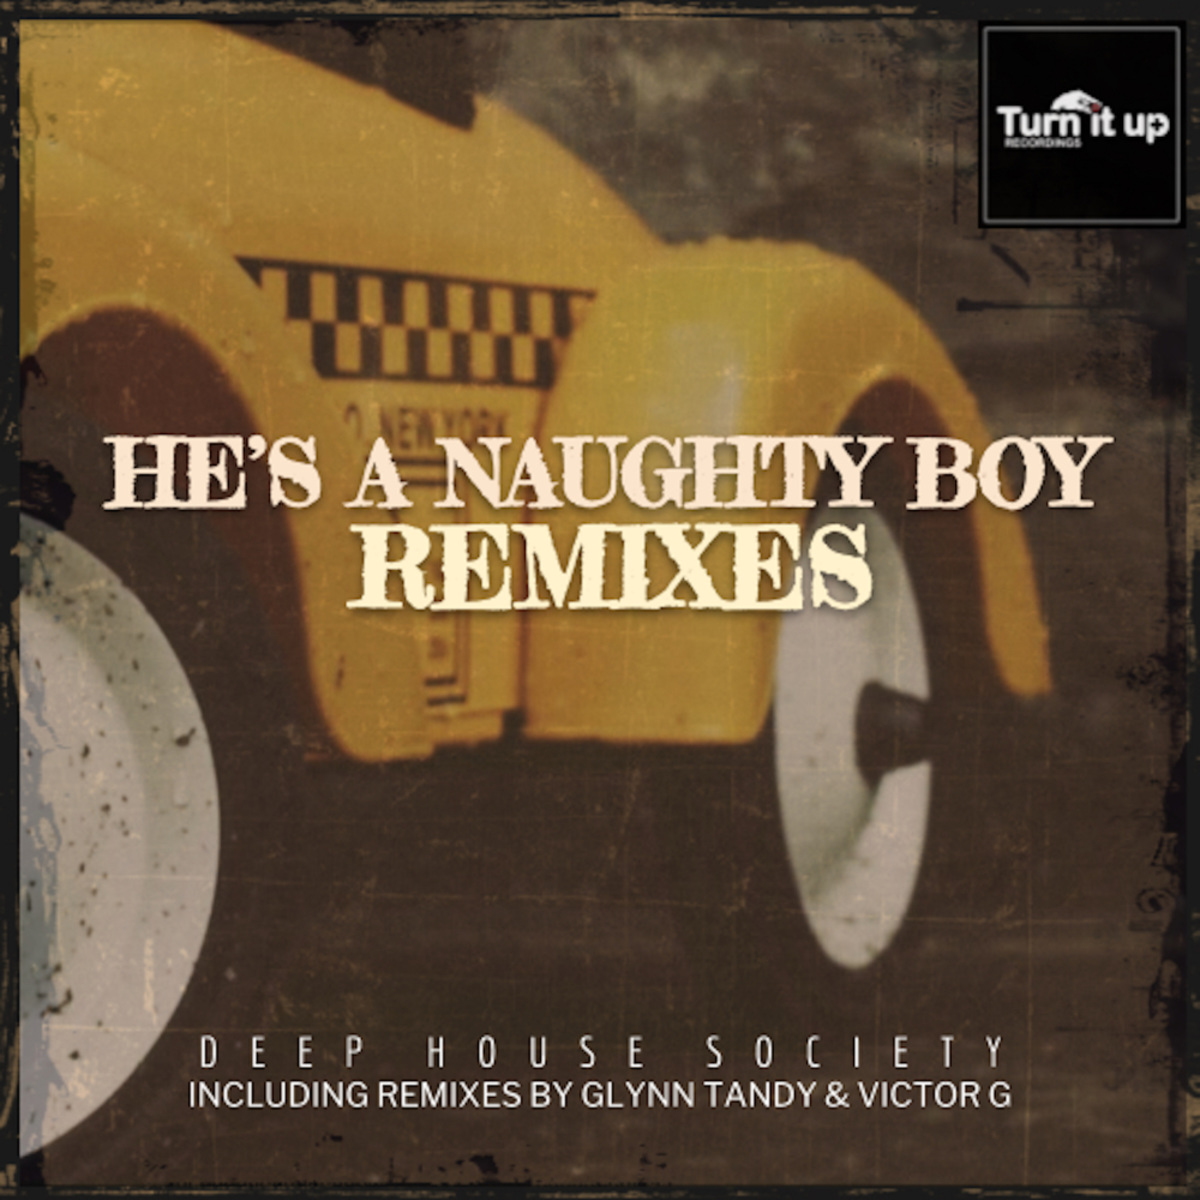 Deep House Society - He's A Naughty Boy Remixes 2 / Turn-it-up Recordings